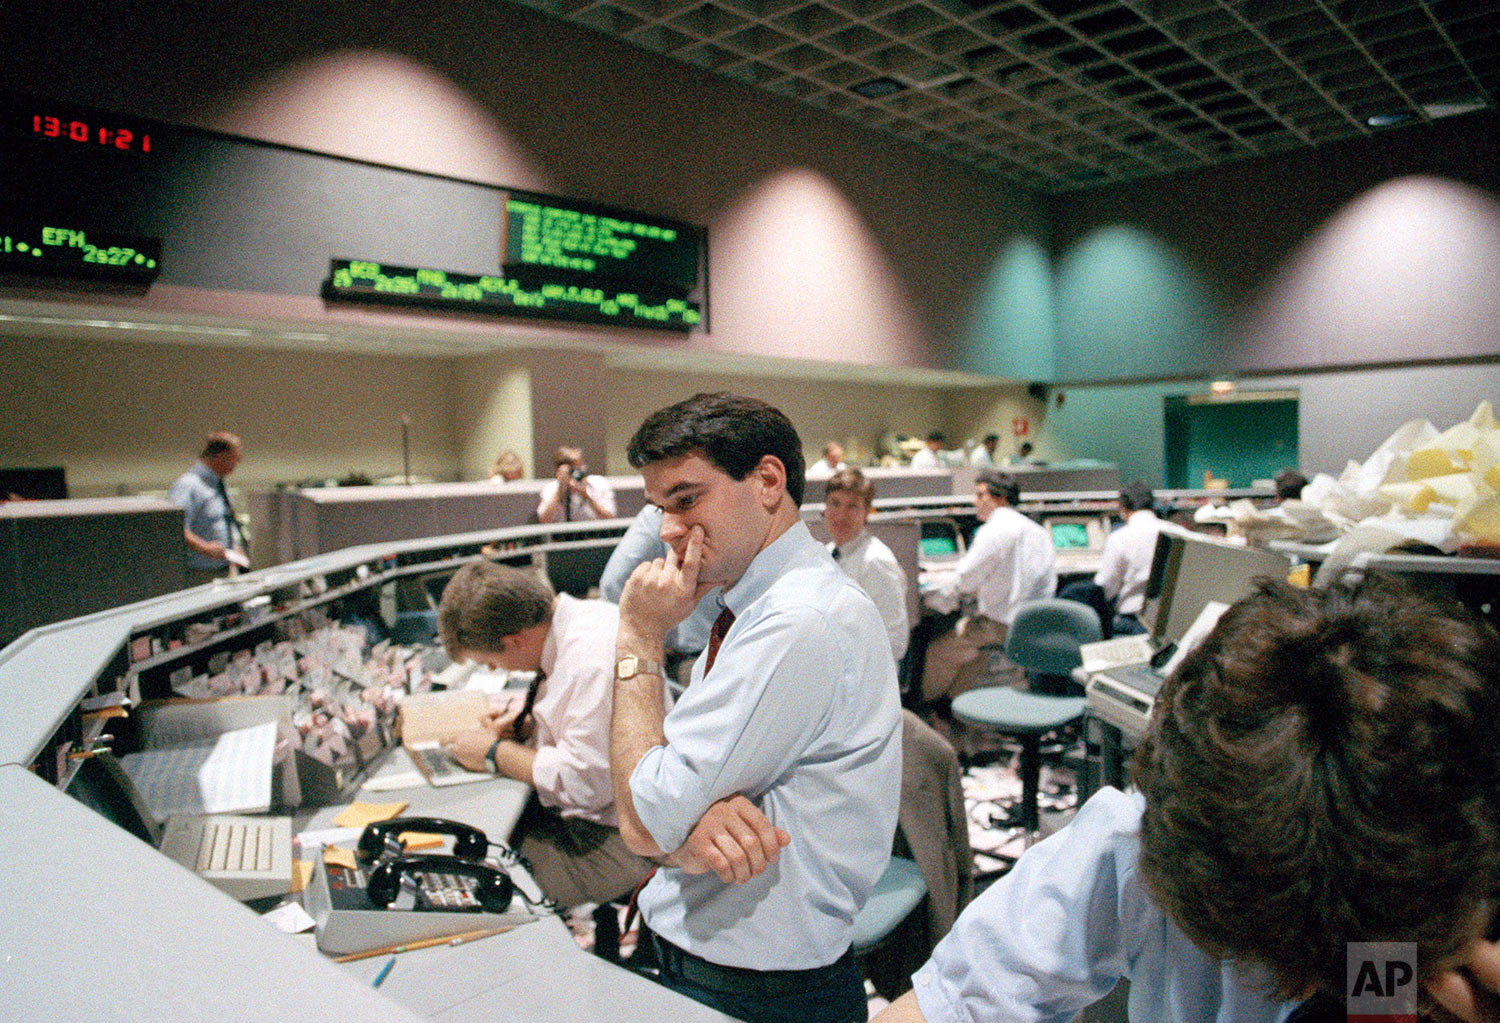  Securities specialist assistant Spencer Varian of Wedbush Securities Co., looks dejected as he watches stock prices plunge on his computer terminal, Oct. 19, 1987, in Los Angeles at the Pacific Stock Exchange. The Pacific Exchange was one of many ar